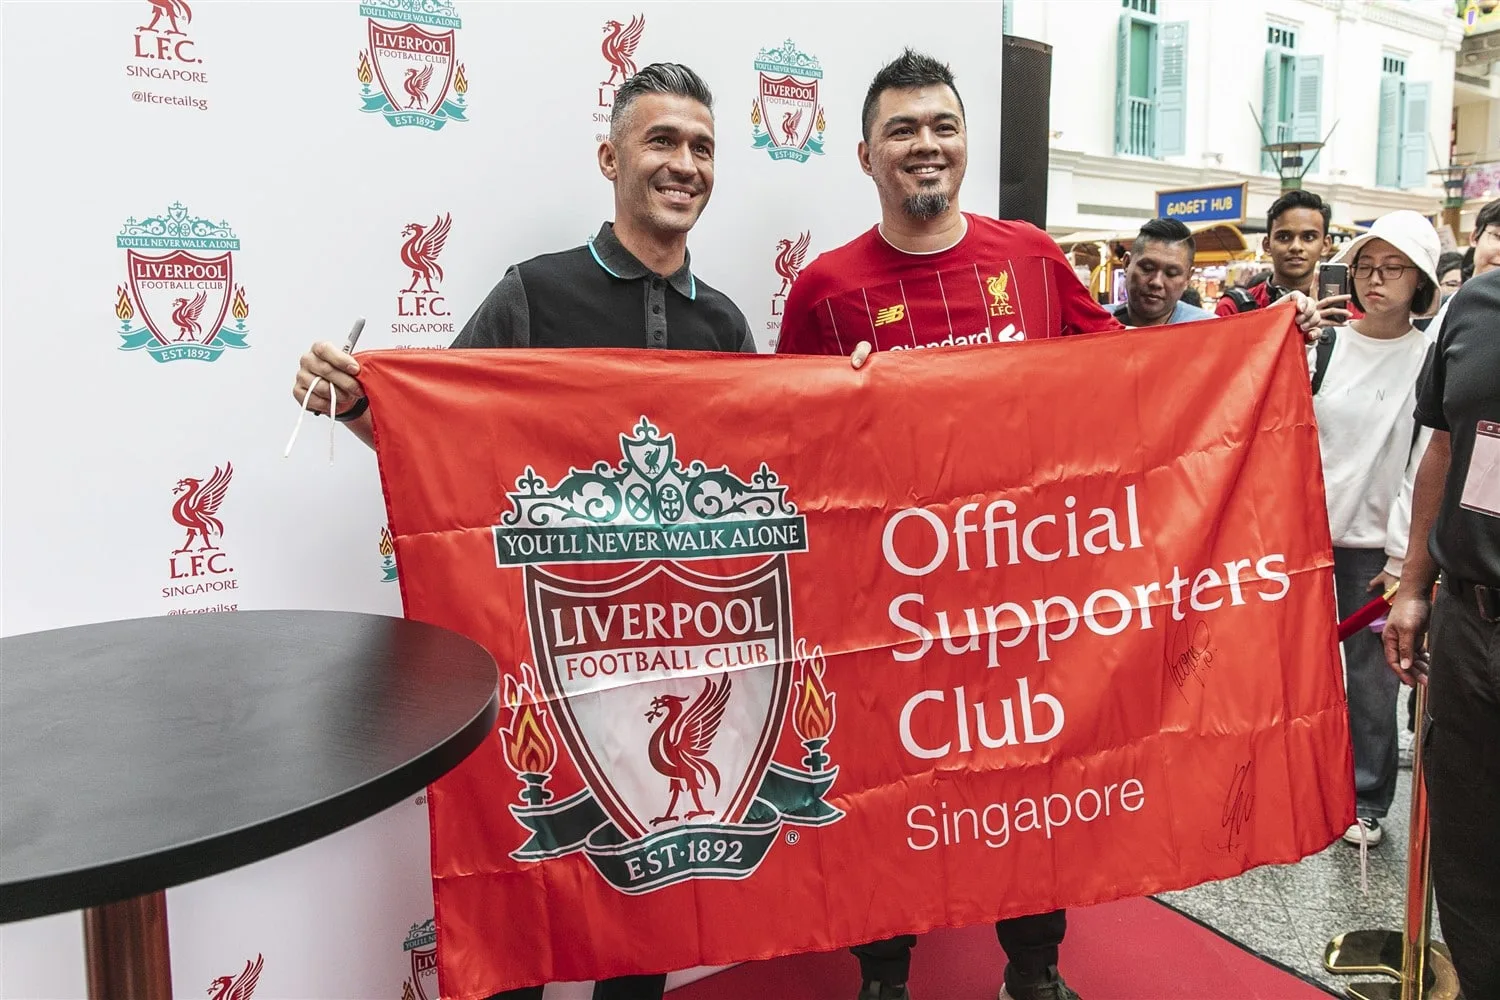 Luis Garcia with the Official Liverpool Supporters Club of Singapore